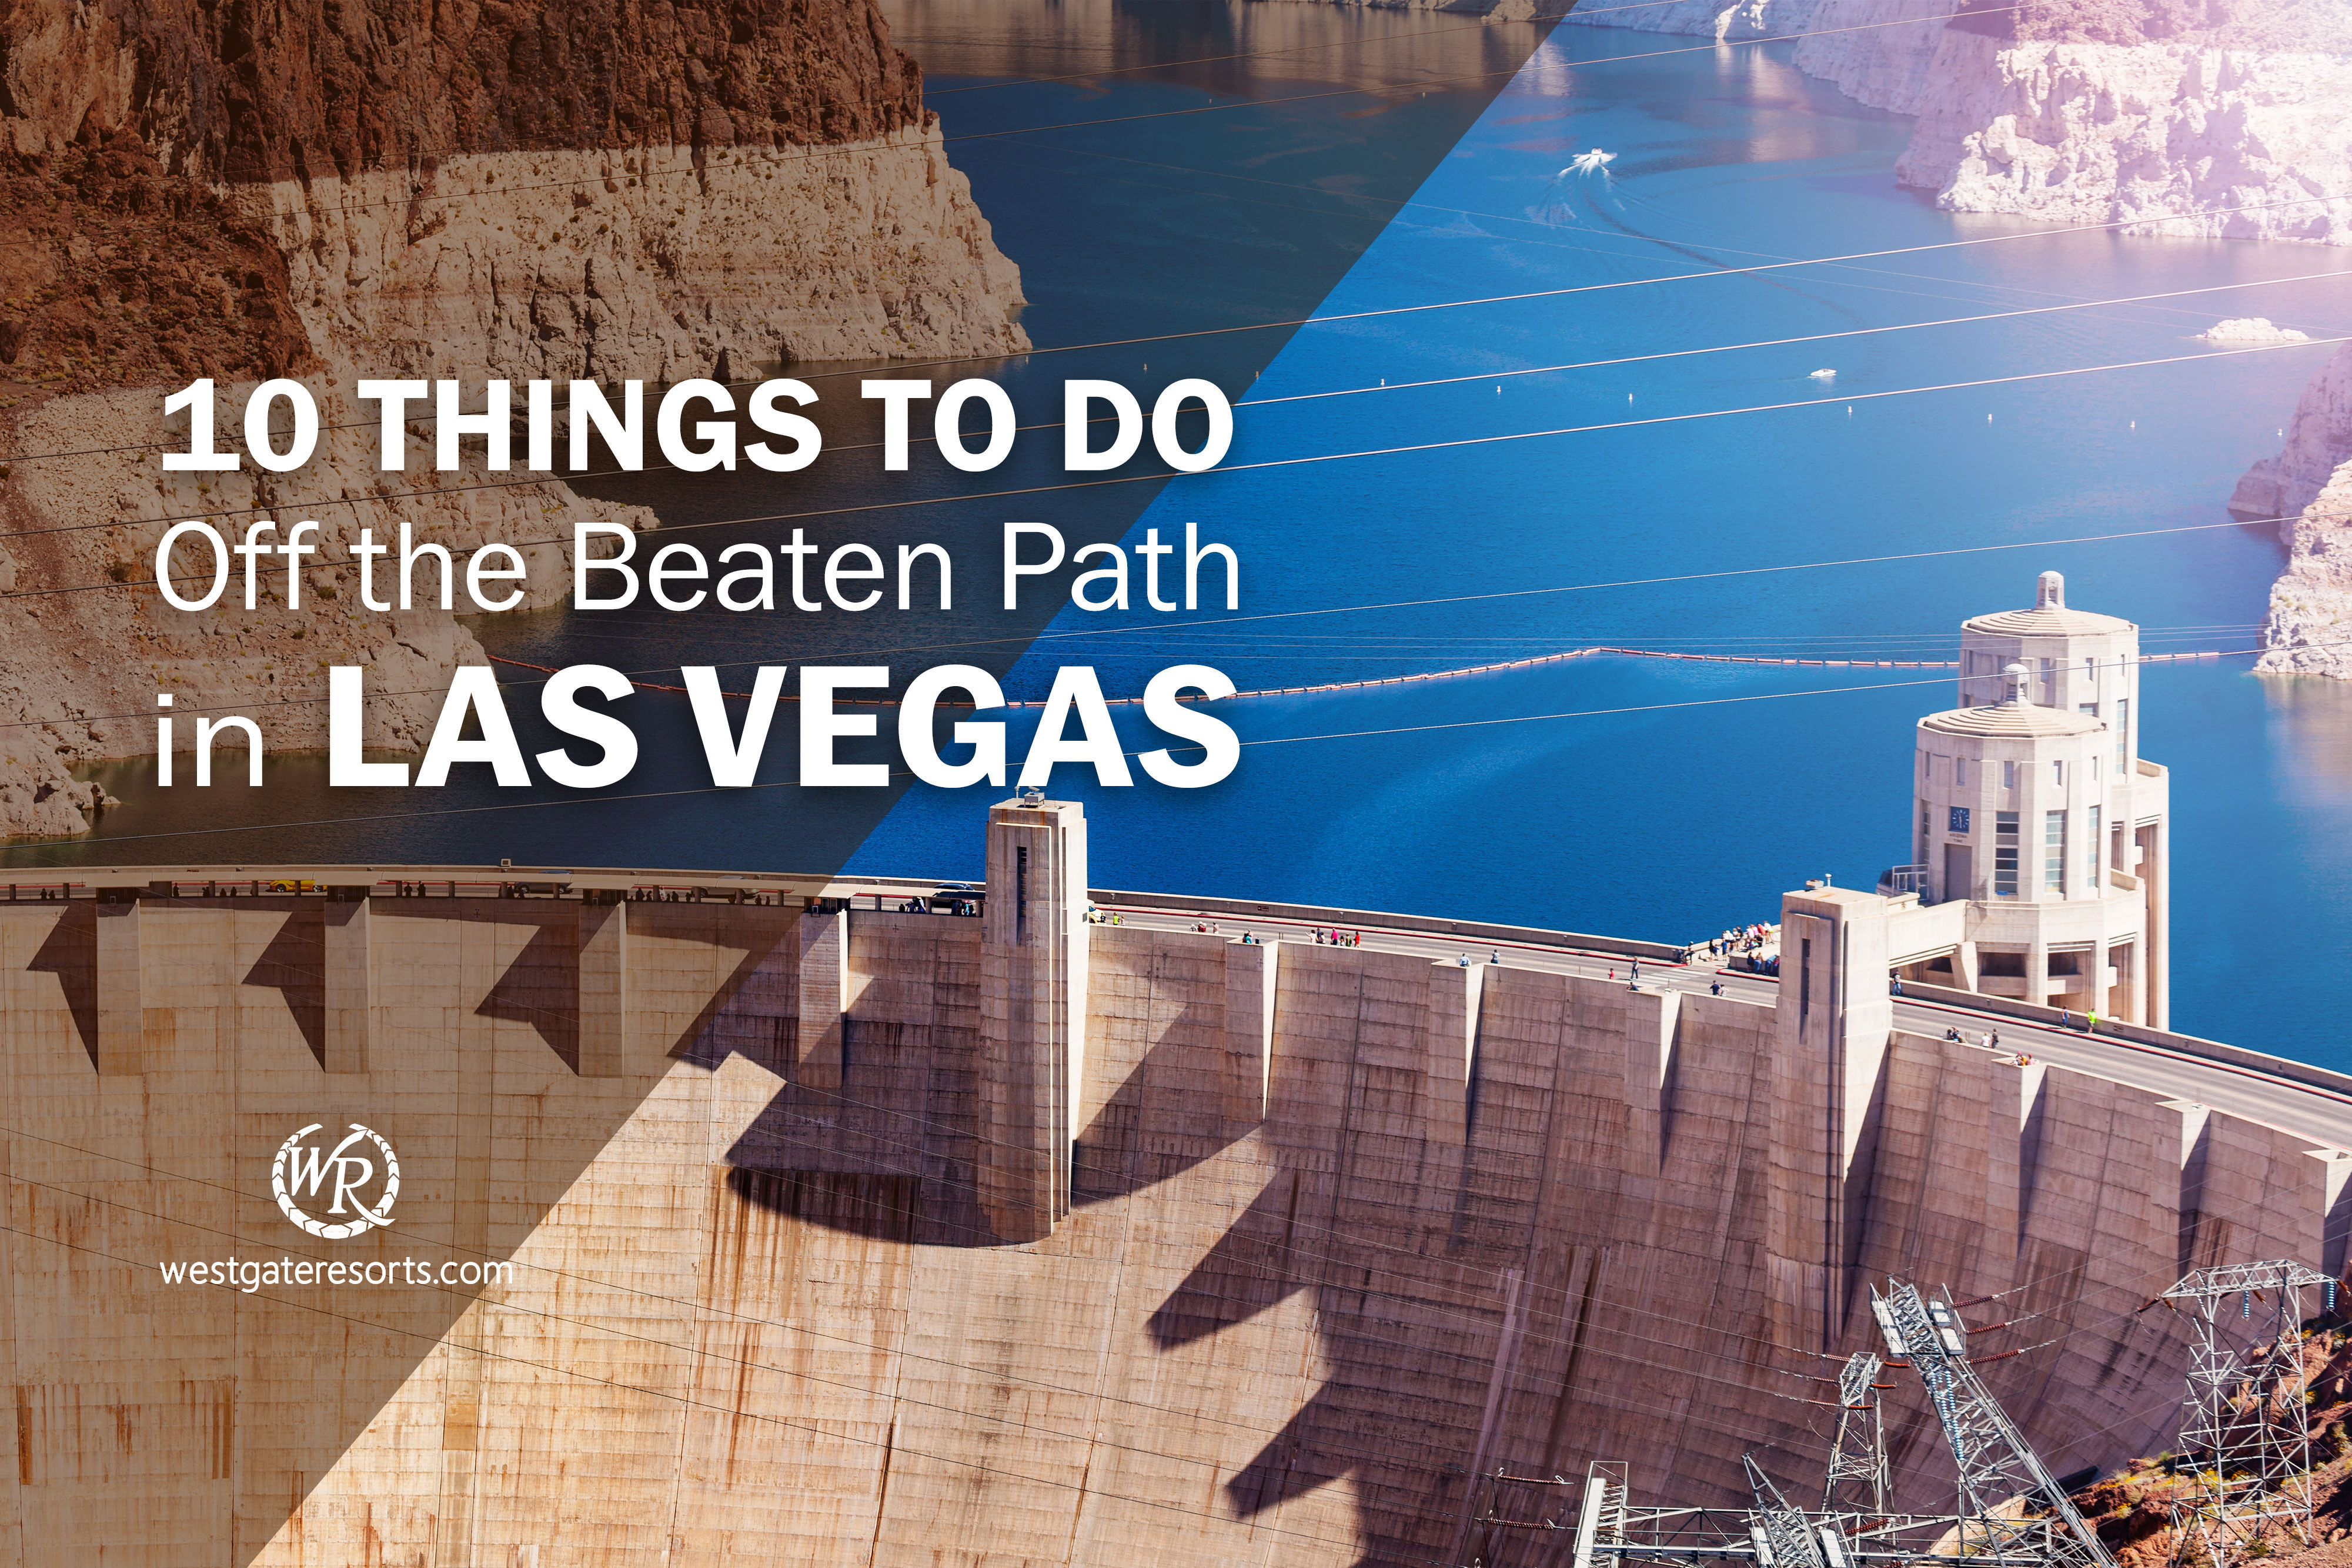 10 Things to do Off the Beaten Path in Las Vegas